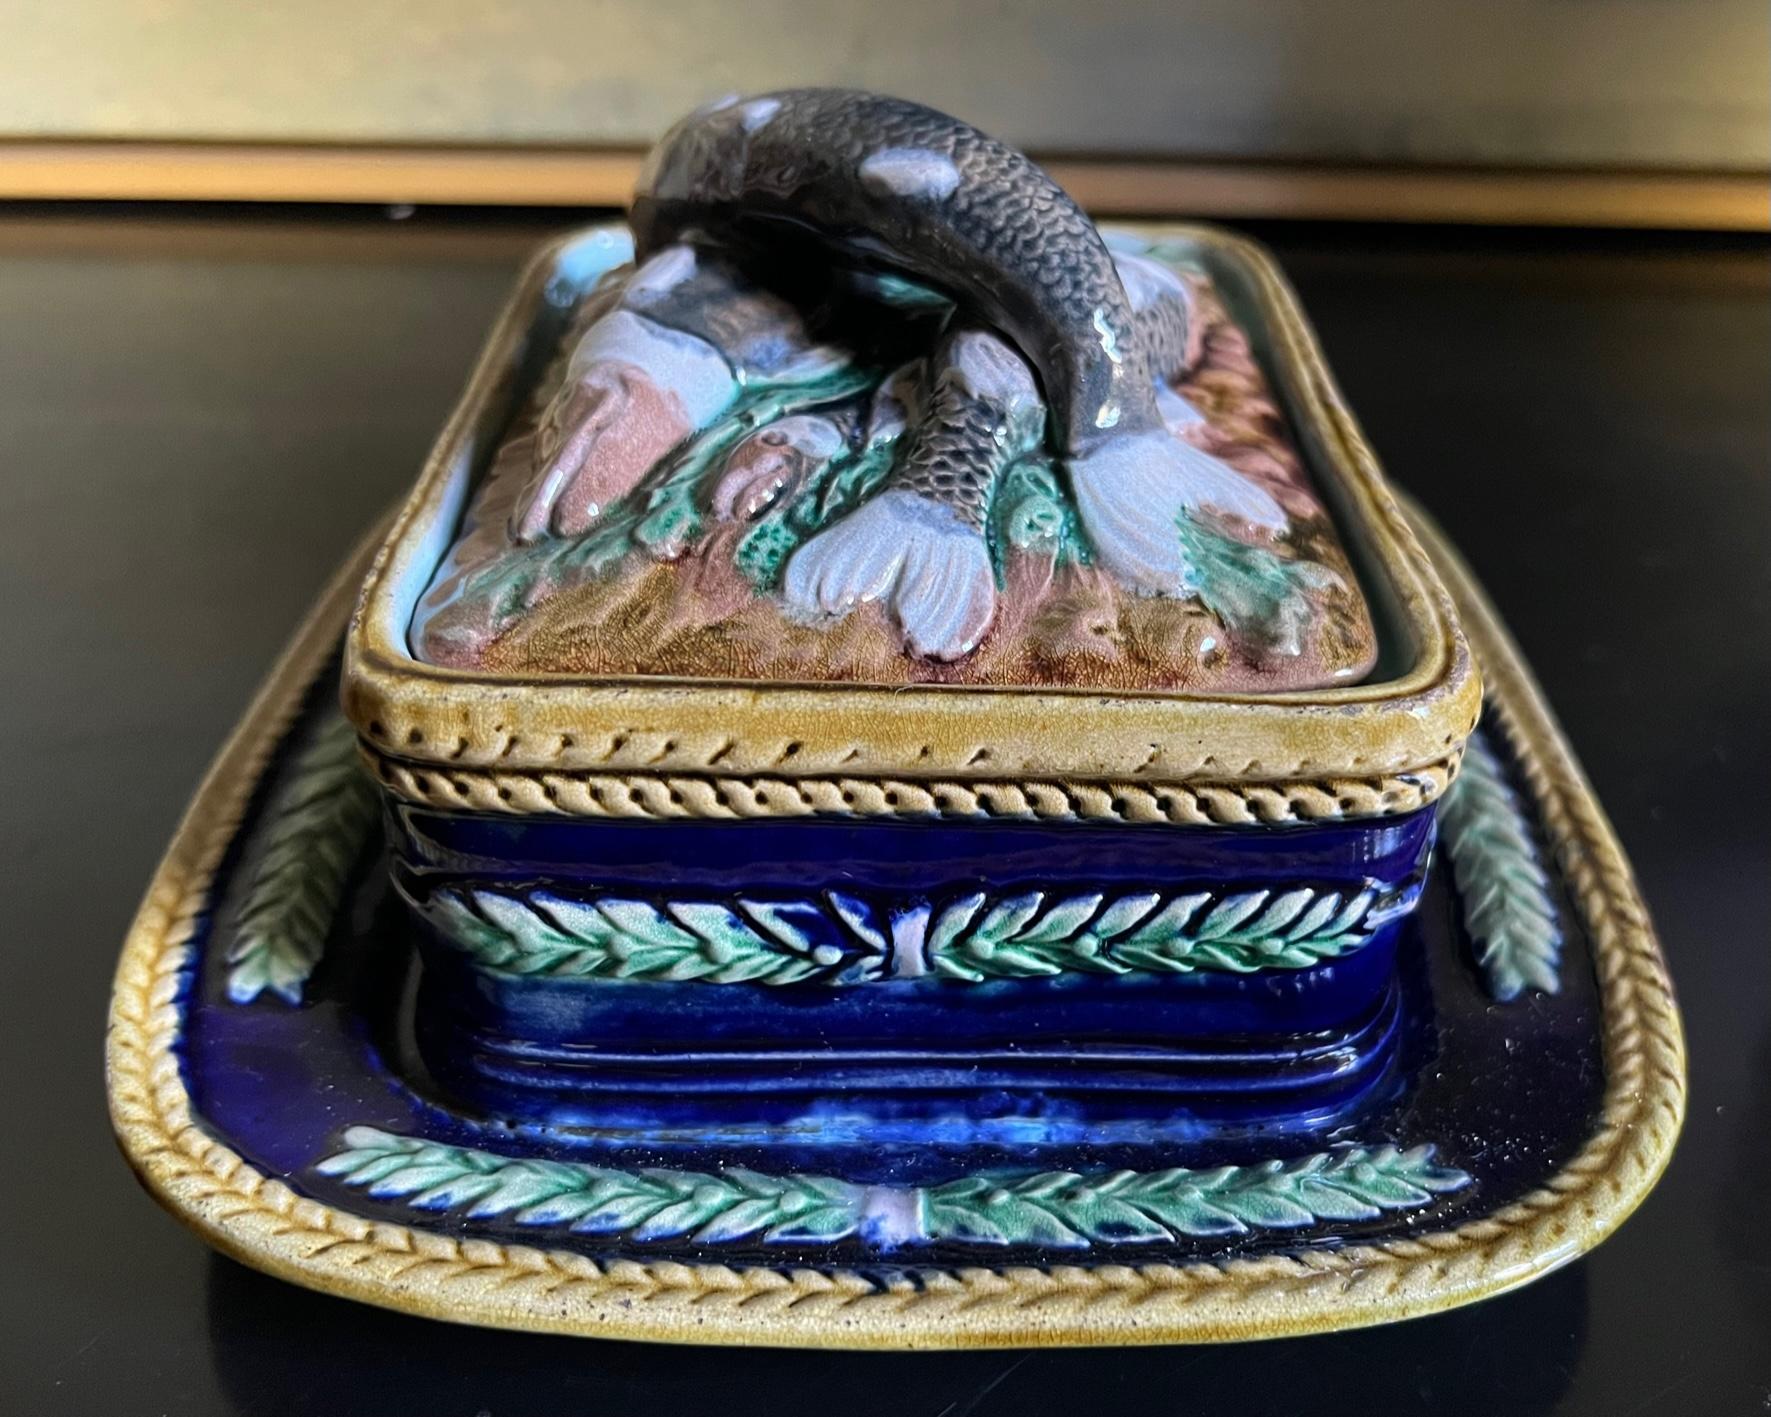 Majolica lidded sardine box made in England in the late 19th century. The lid is molded in high relief with fish on a bed of mustard colored seaweed.  The box is hand painted cobalt blue decorated with green leaves with the inside finished with a